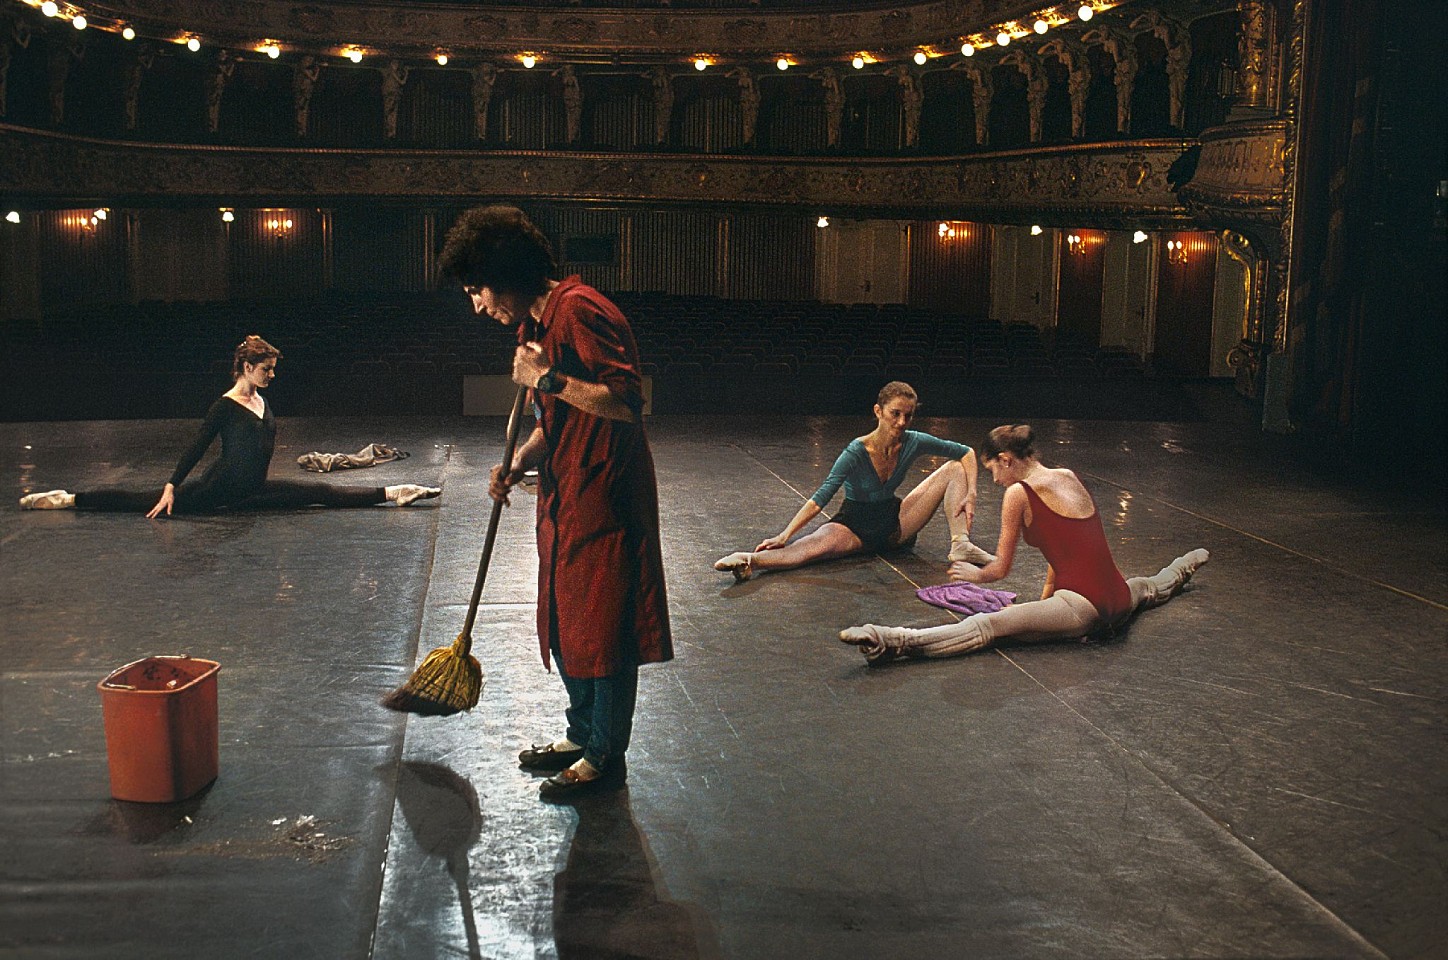 Steve McCurry, Ballerinas on Stage, 1989
FujiFlex Crystal Archive Print
Price/Size on request